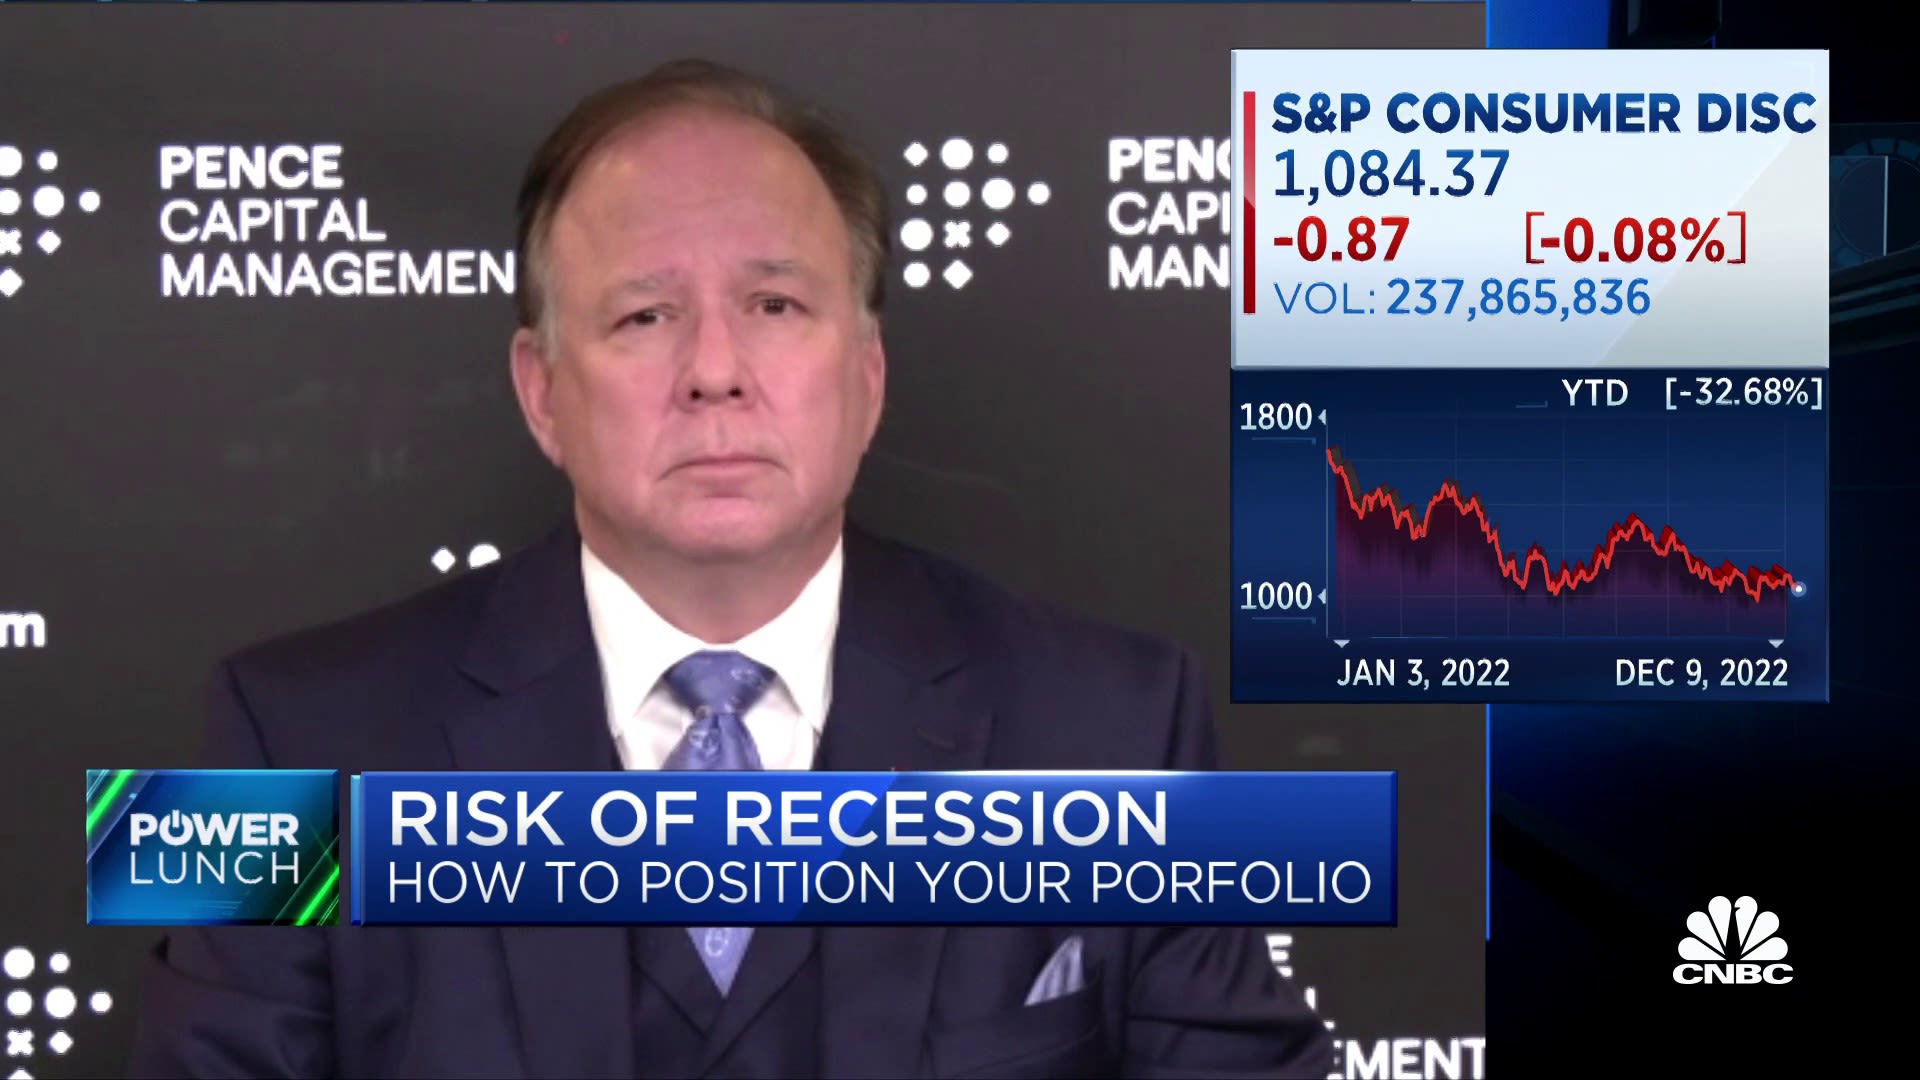 Fed needs to pause rate hikes before we get significantly bullish, says Pence Capital's Dryden Pence